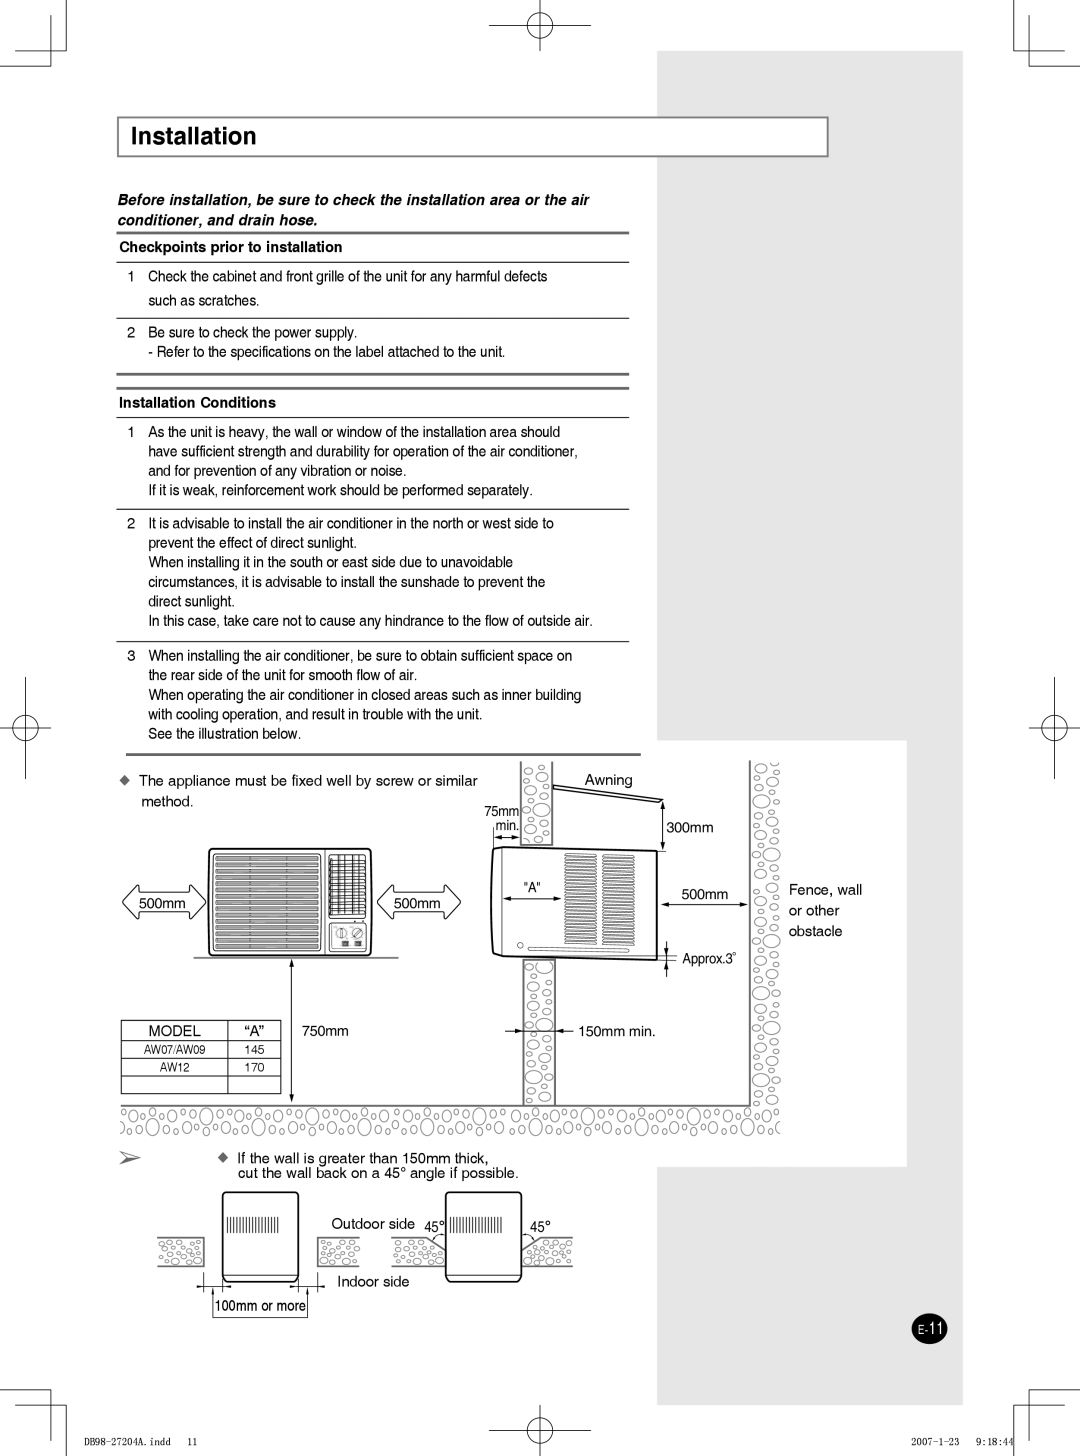 Samsung AW07P2, AW12P2, AW09P2 user manual Checkpoints prior to installation, Installation Conditions 